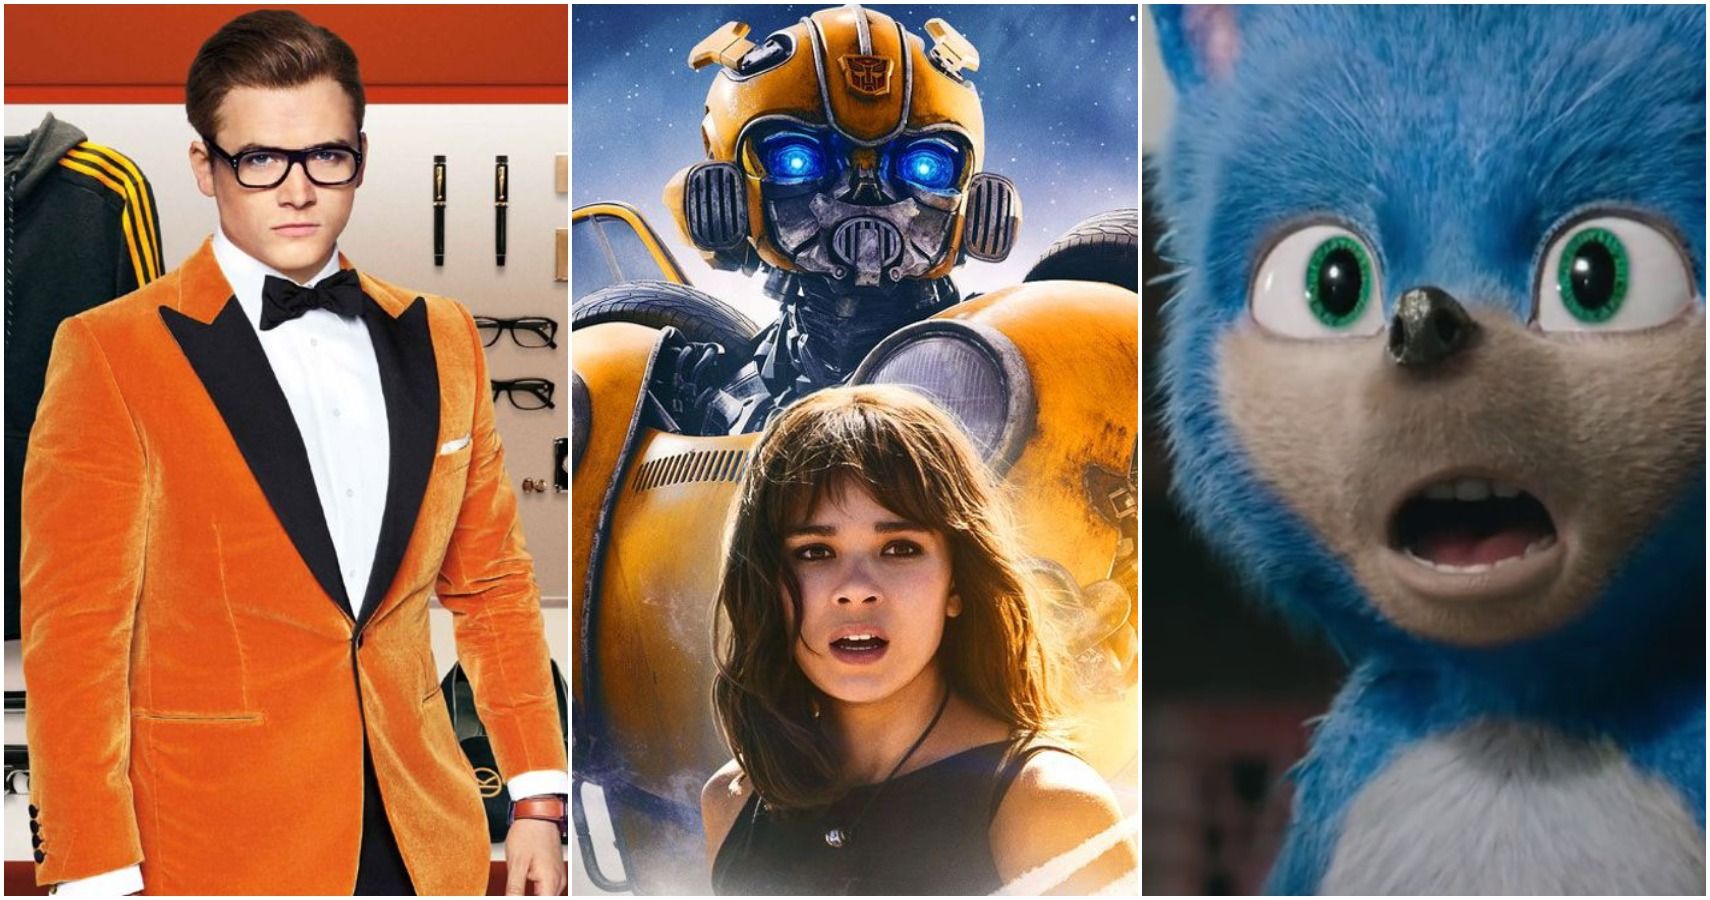 10 Movies From The Last Decade That Had The Lowest Expectations (But Turned Out Amazing)